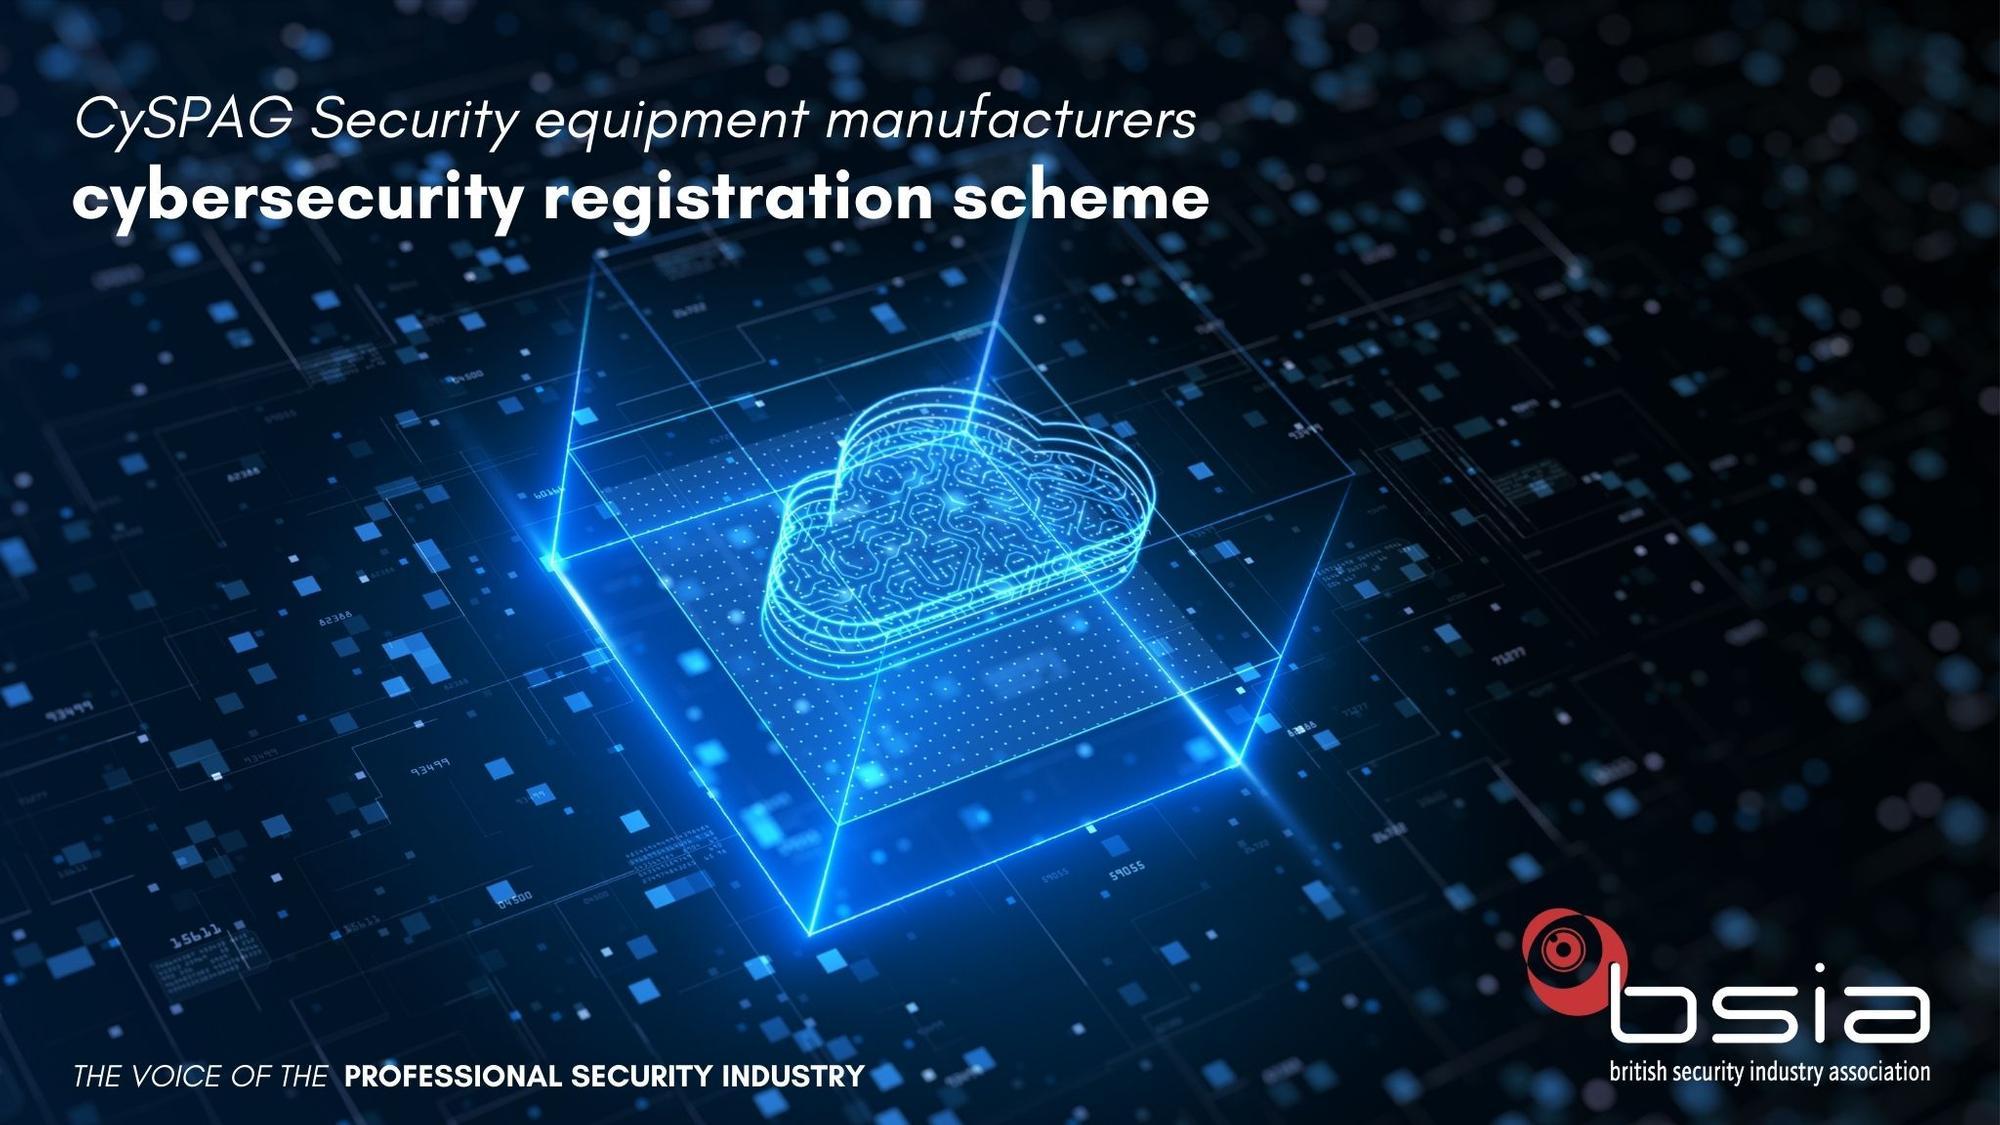 New security equipment manufacturers cybersecurity guide released